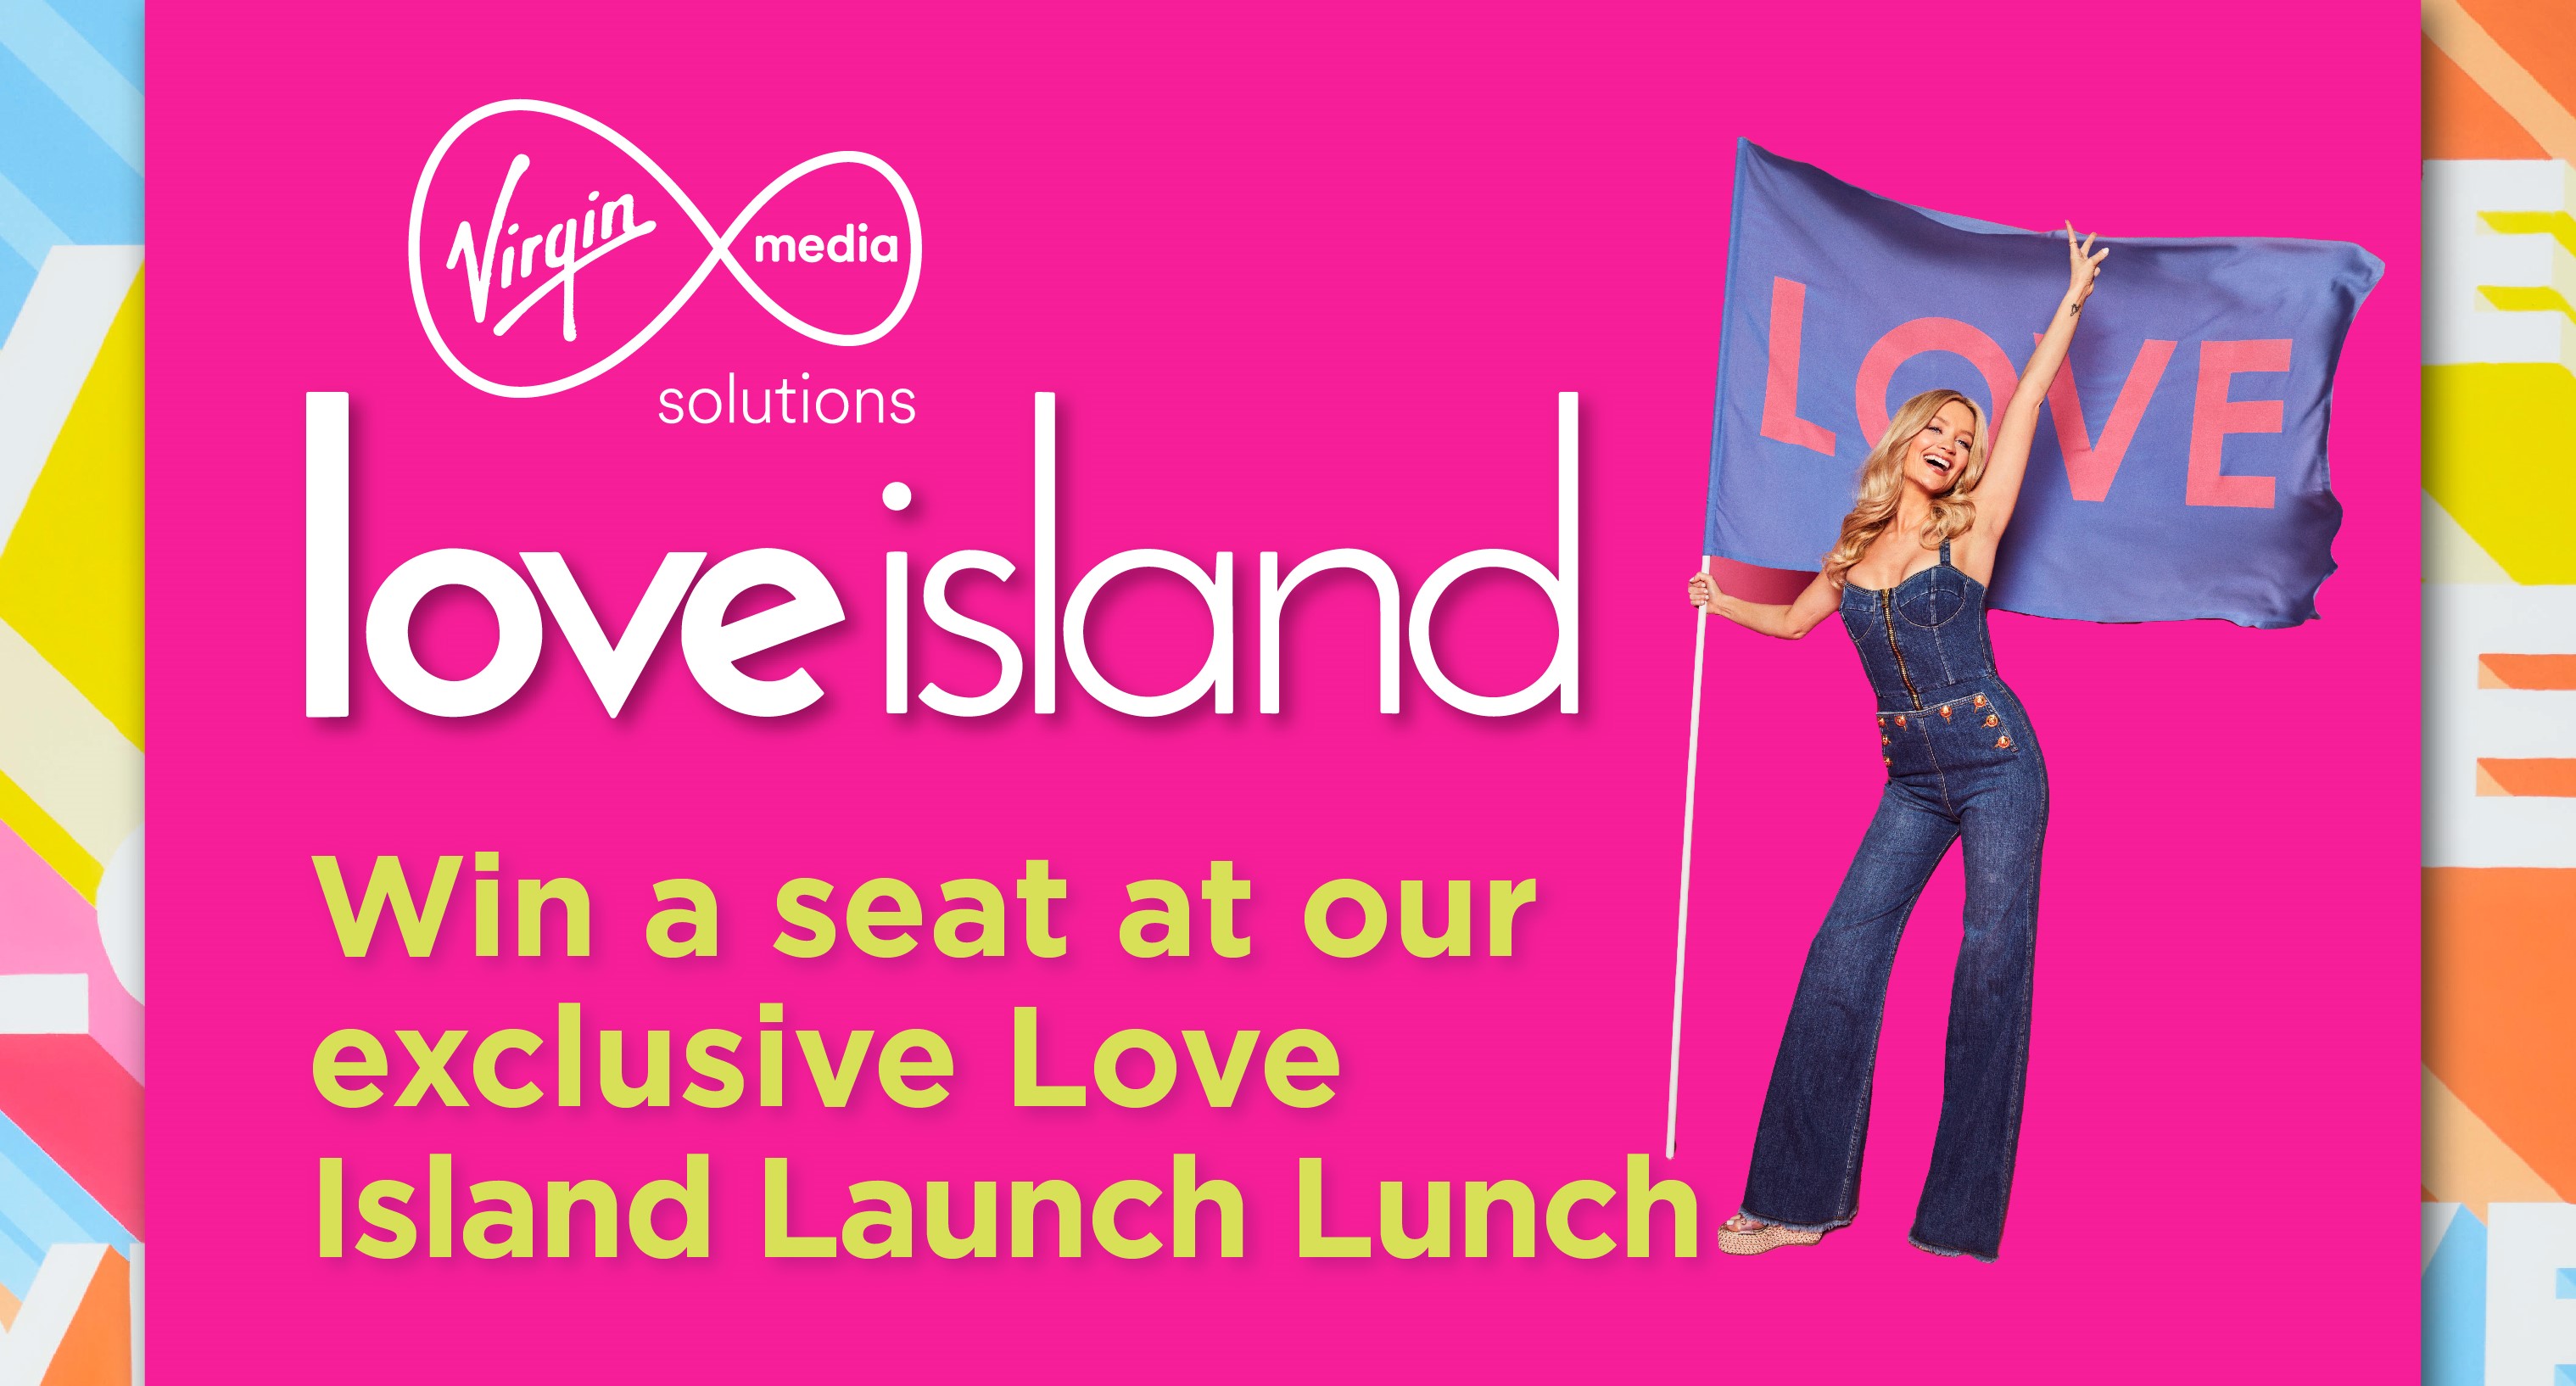 Win a seat at our exclusive Love Island Launch Lunch! 